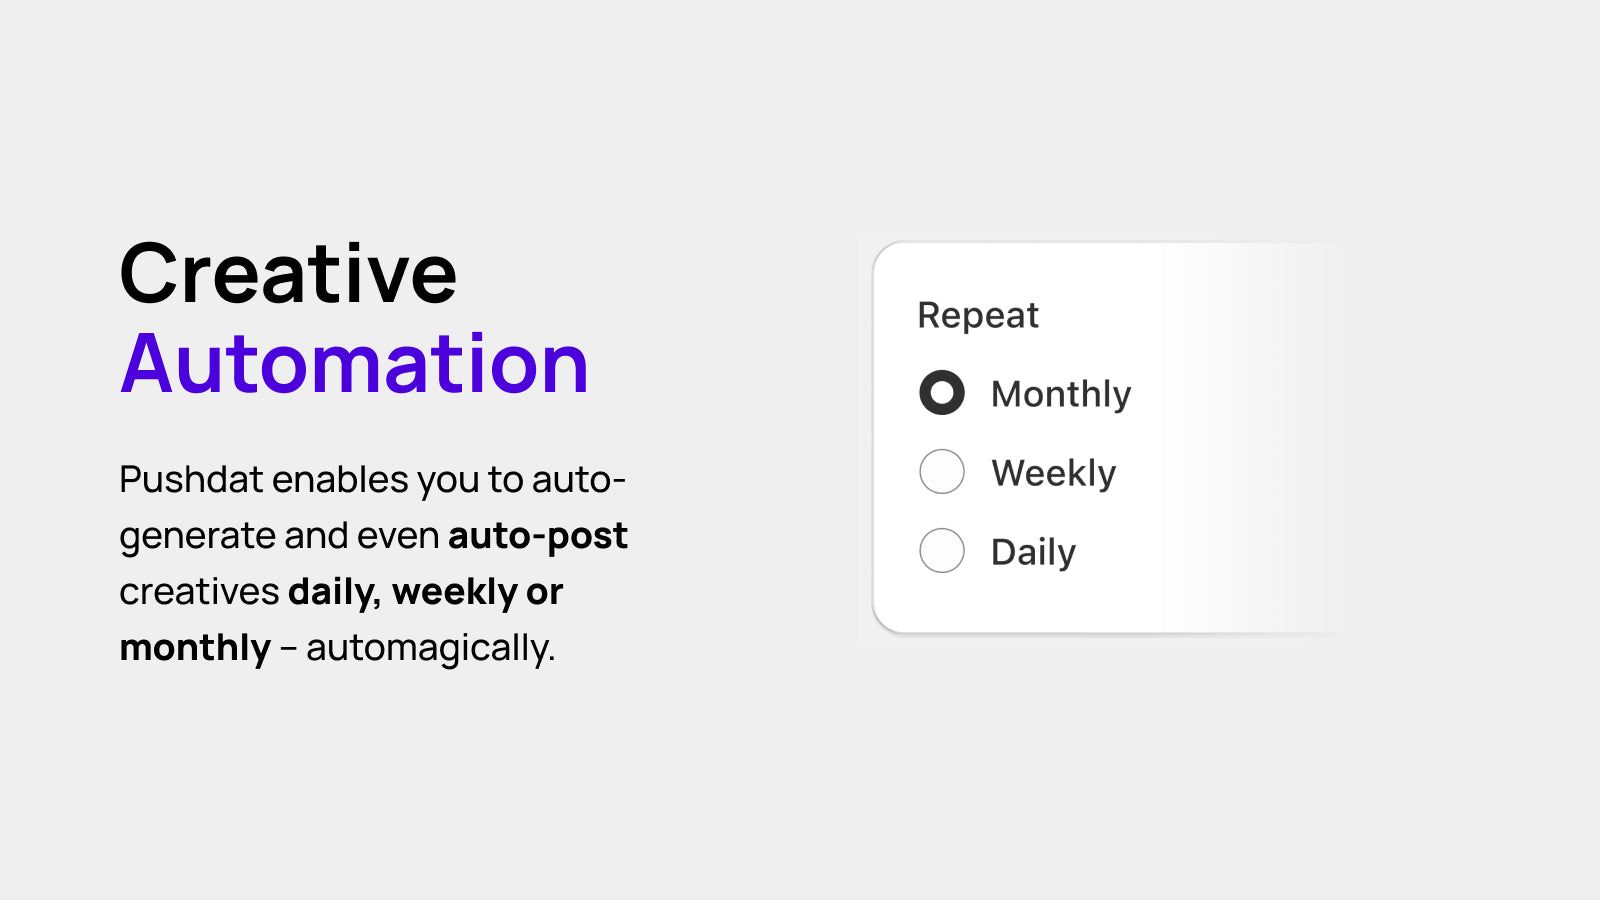 Creative Automation. Auto-generate and auto-post content.